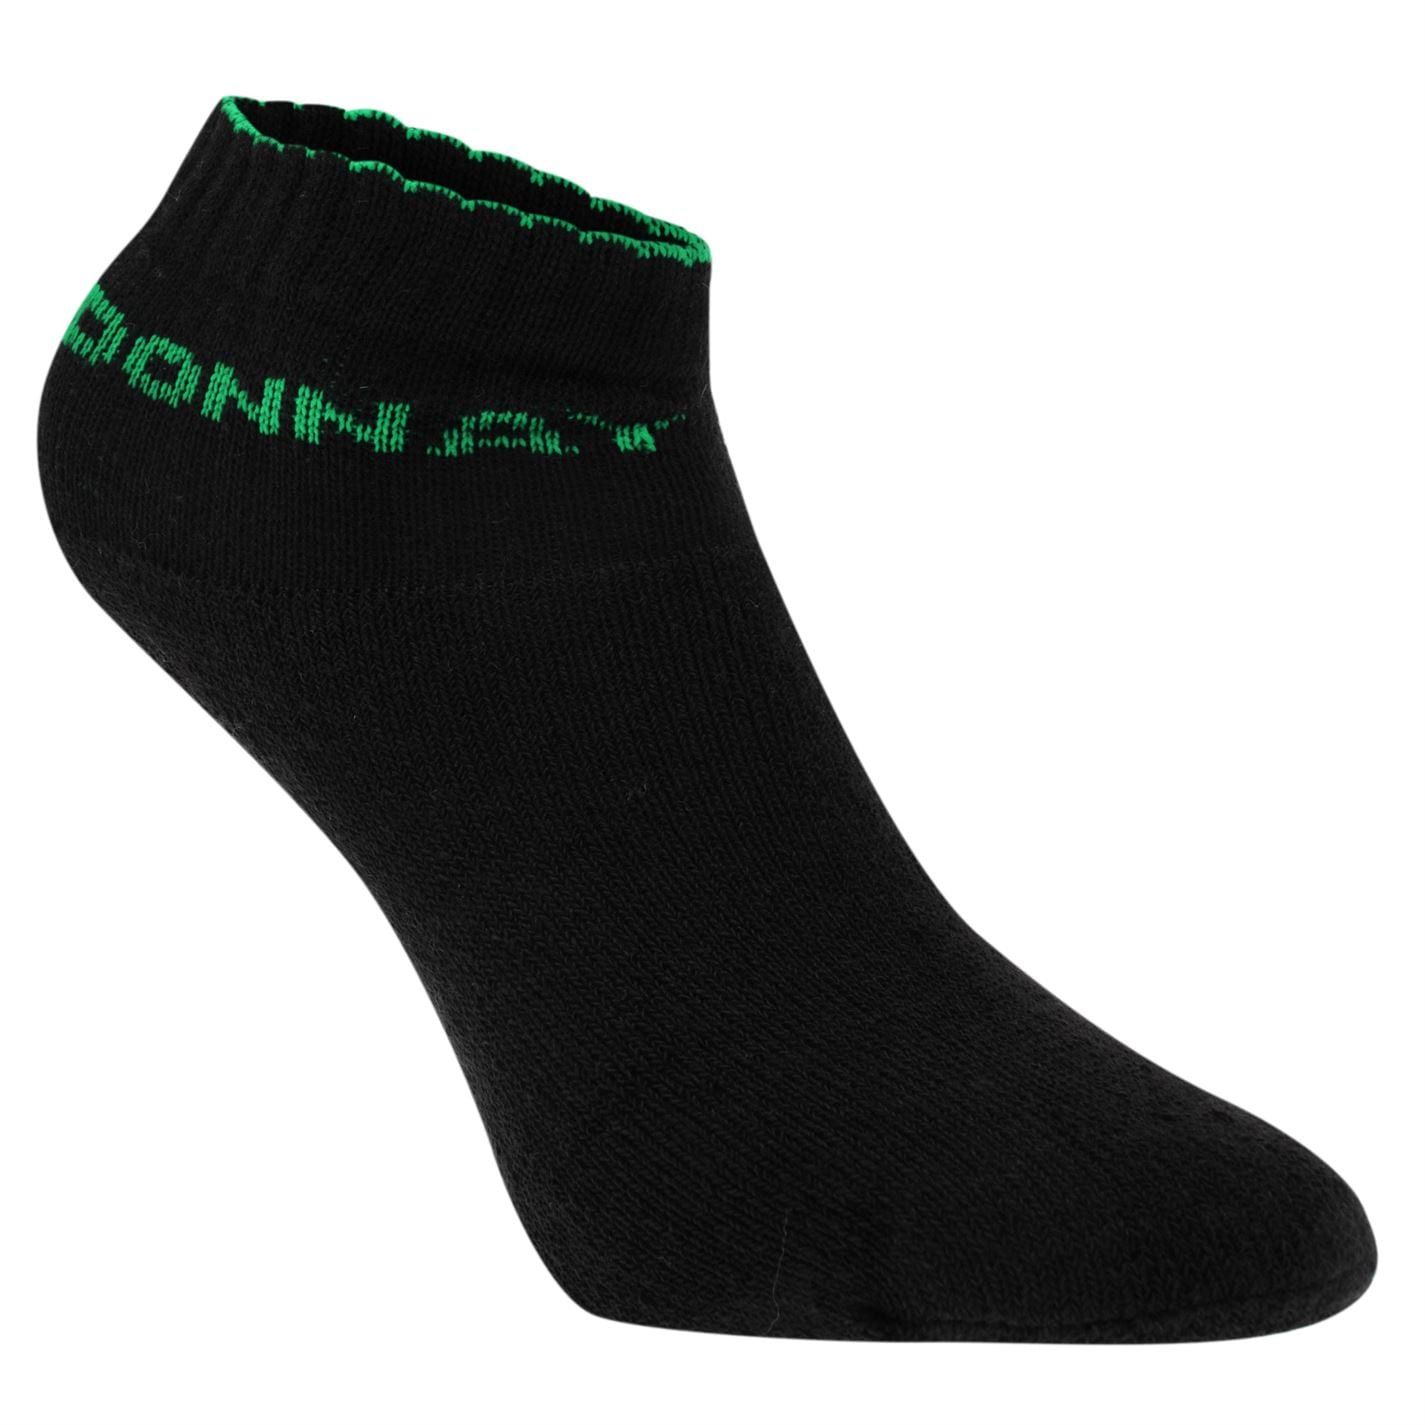 <strong>Donnay Quarter Socks 12 Pack Childrens</strong><br><br> These Donnay Quarter 12 Pack Socks, feature a ribbed design to the ankle for a secure fit. <br>> Socks<br>> 12 pack<br>> Ribbed ankle<br>> Donnay branding<br>> 65% cotton 25% polyester 10% other fibres